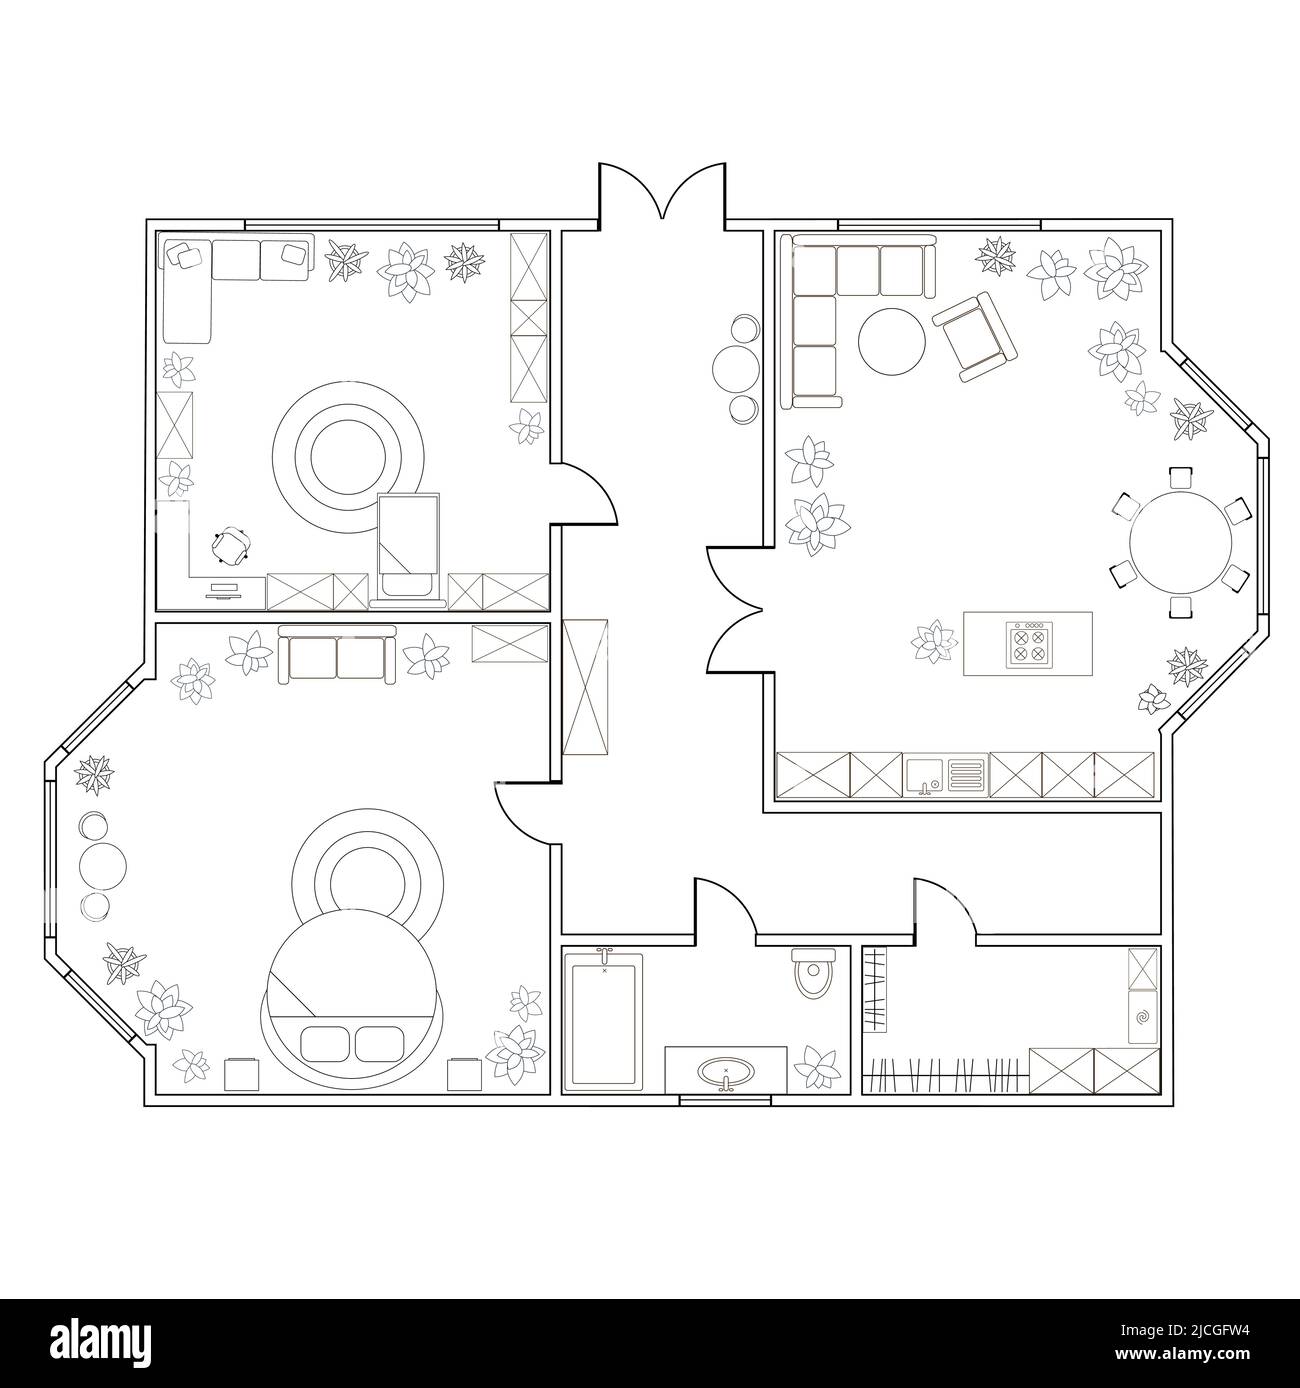 Abstract plan of two-bedroom apartment, with kitchen, bathroom, bedroom, living room. Vector illustration EPS8 Stock Vector